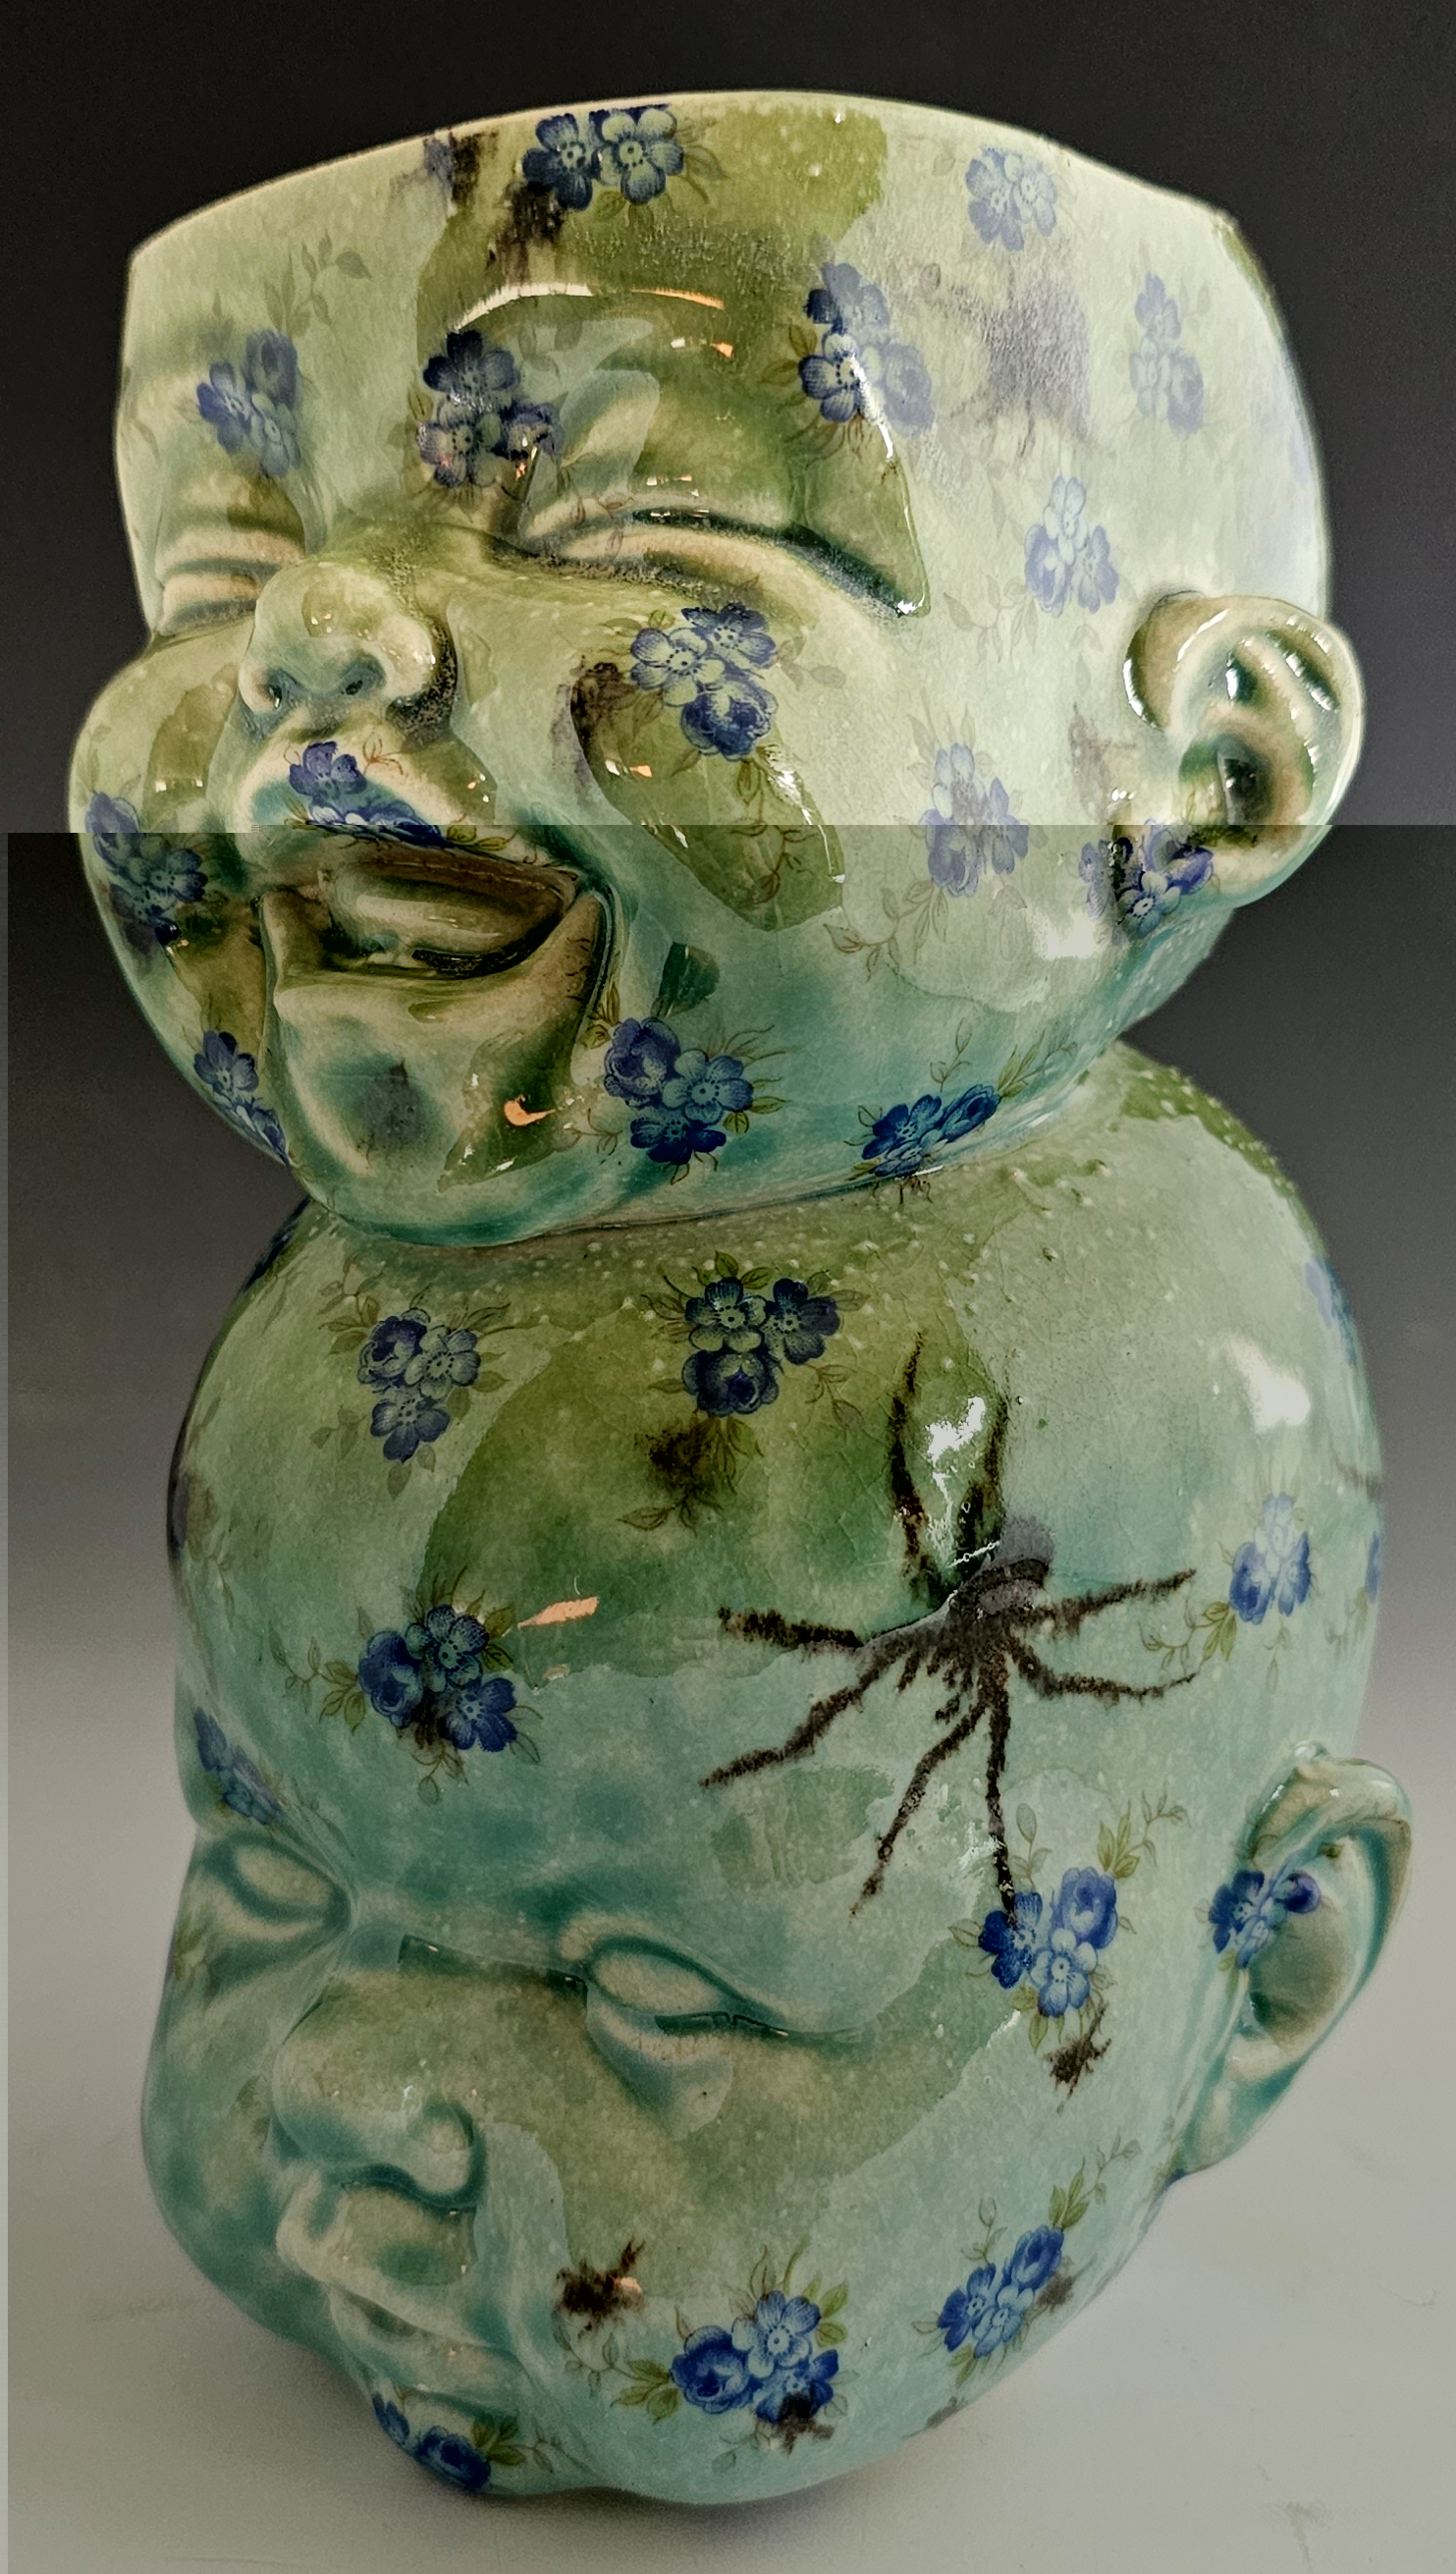 A ceramic vase made using baby head molds